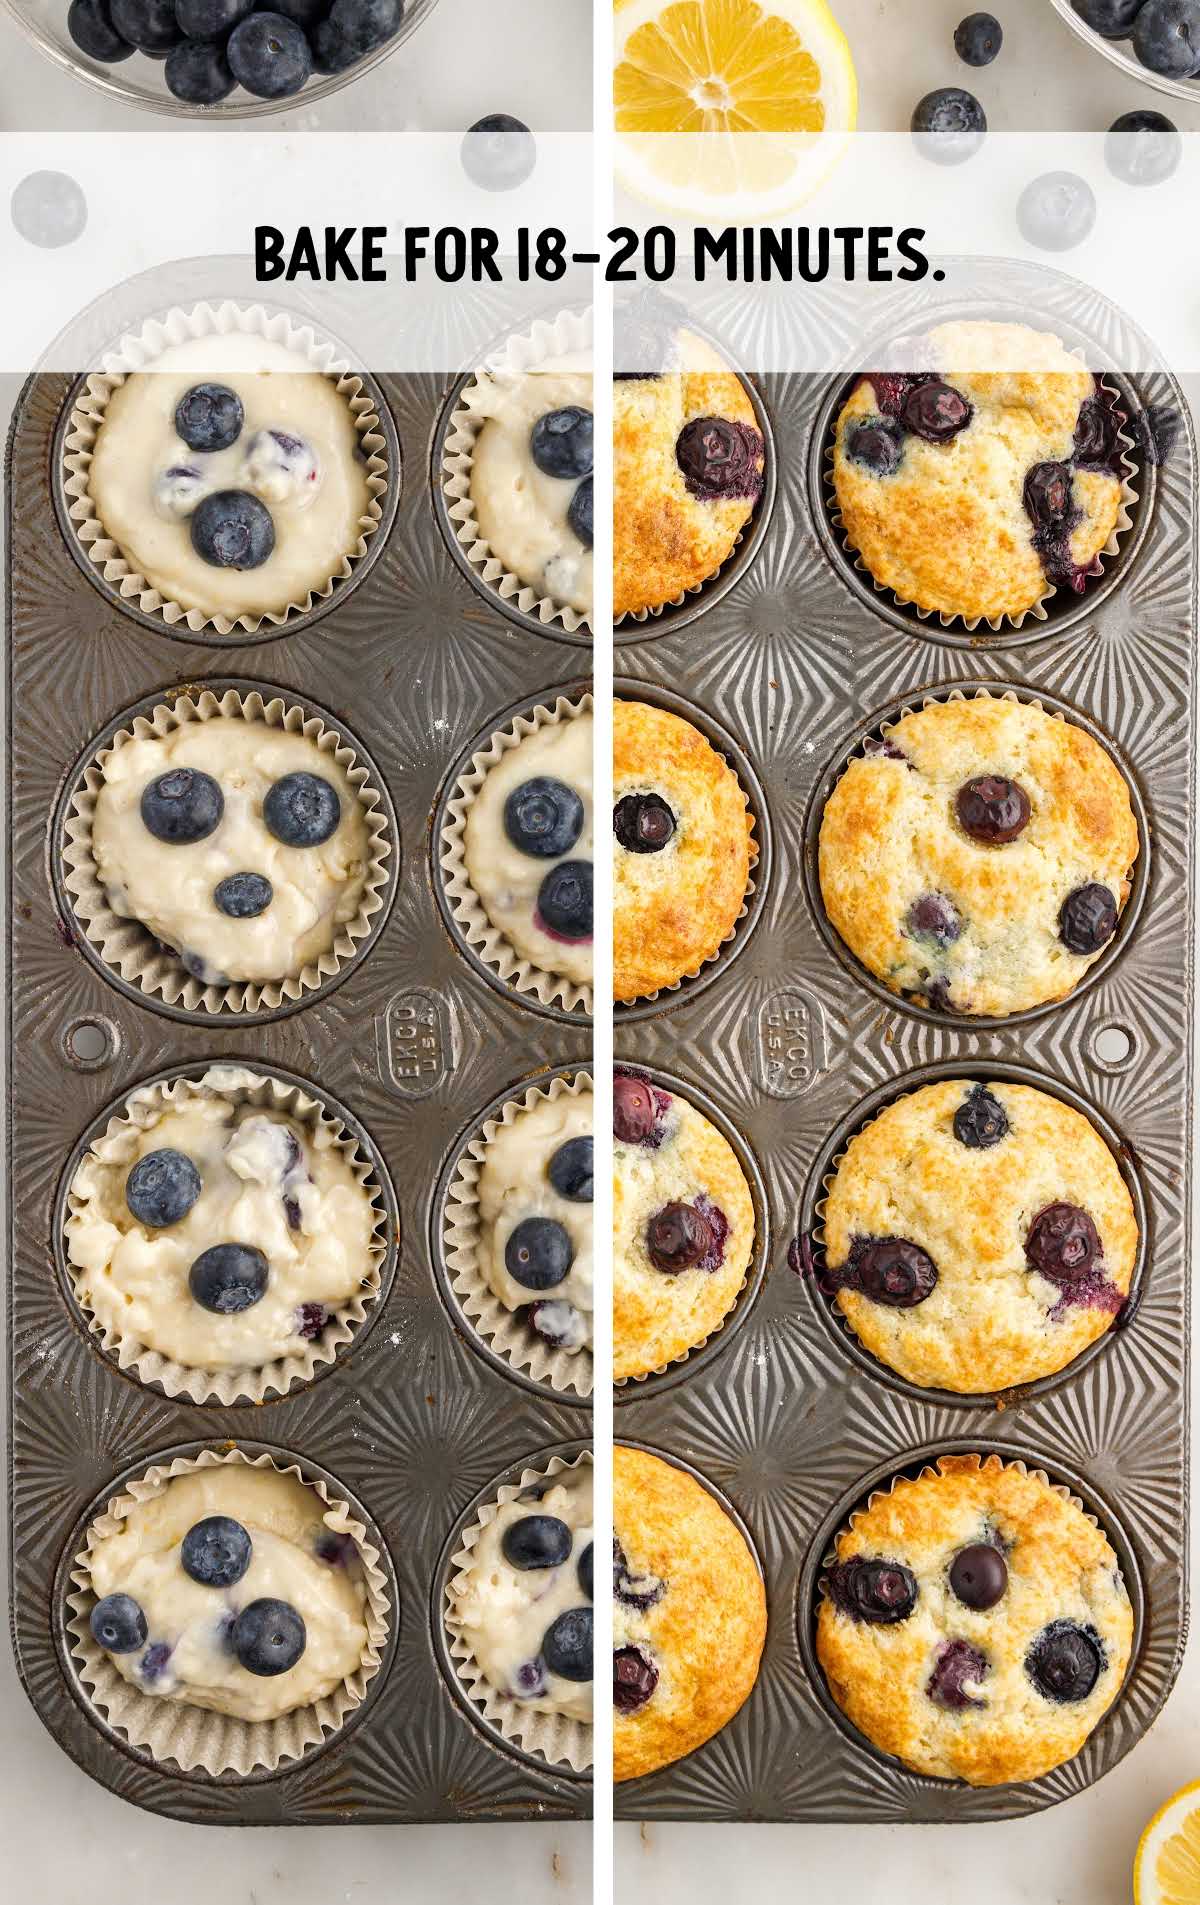 bake muffins for 18-20 minutes